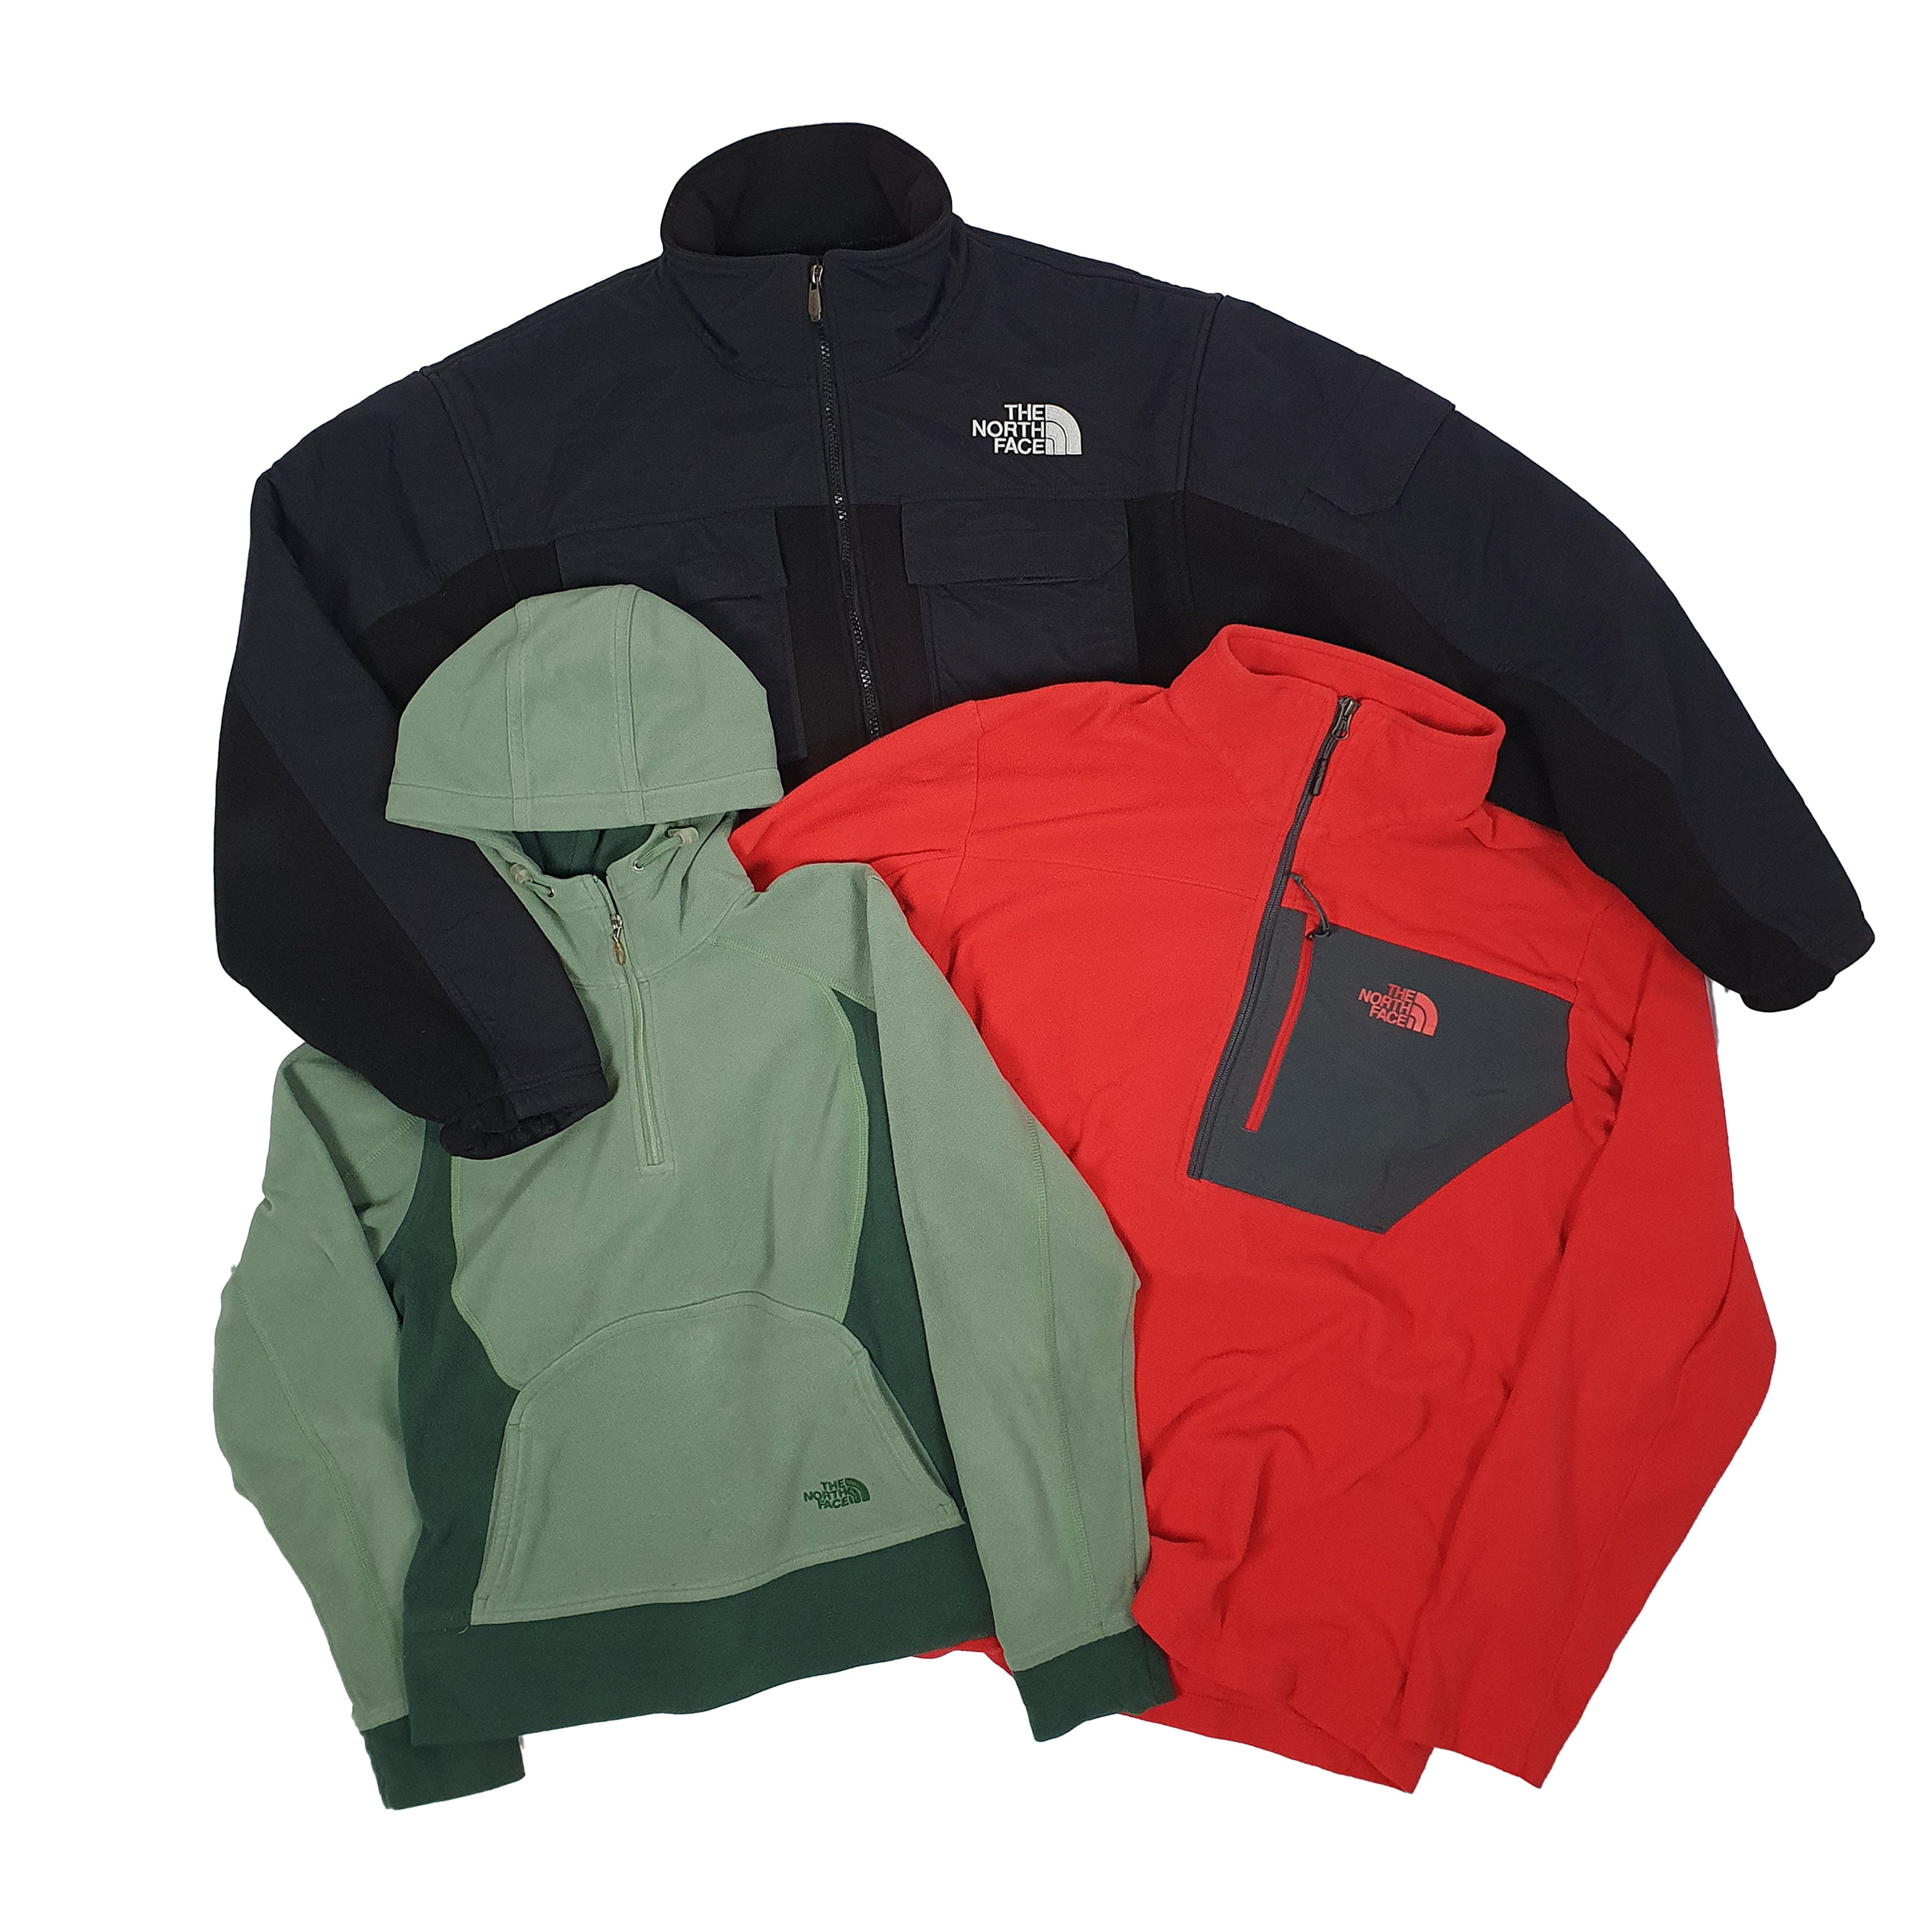 THE NORTH FACE FLEECE JACKETS